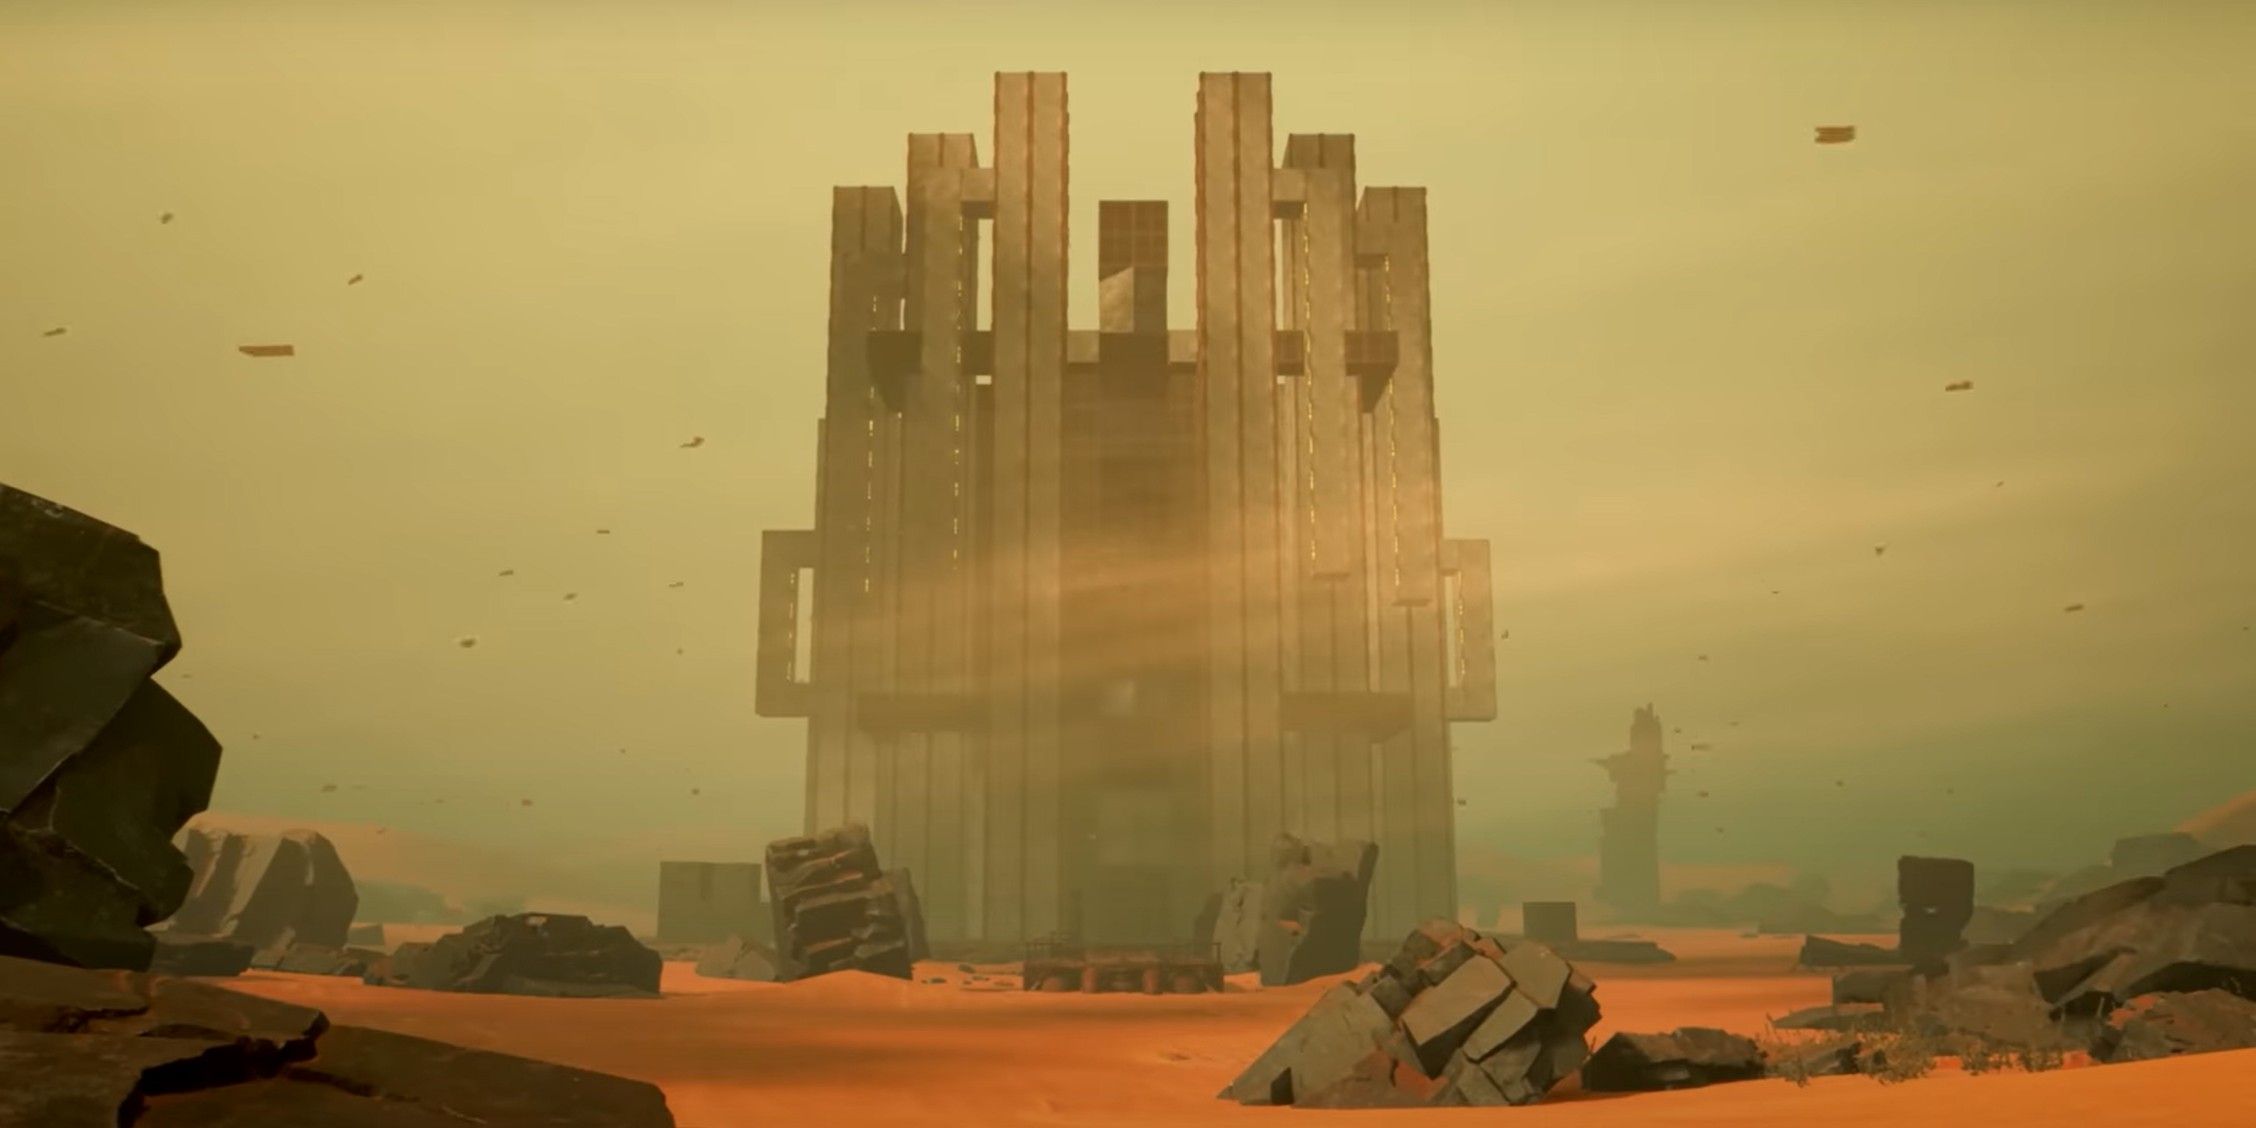 An Outpost featured in the reveal trailer for Meet Your Maker